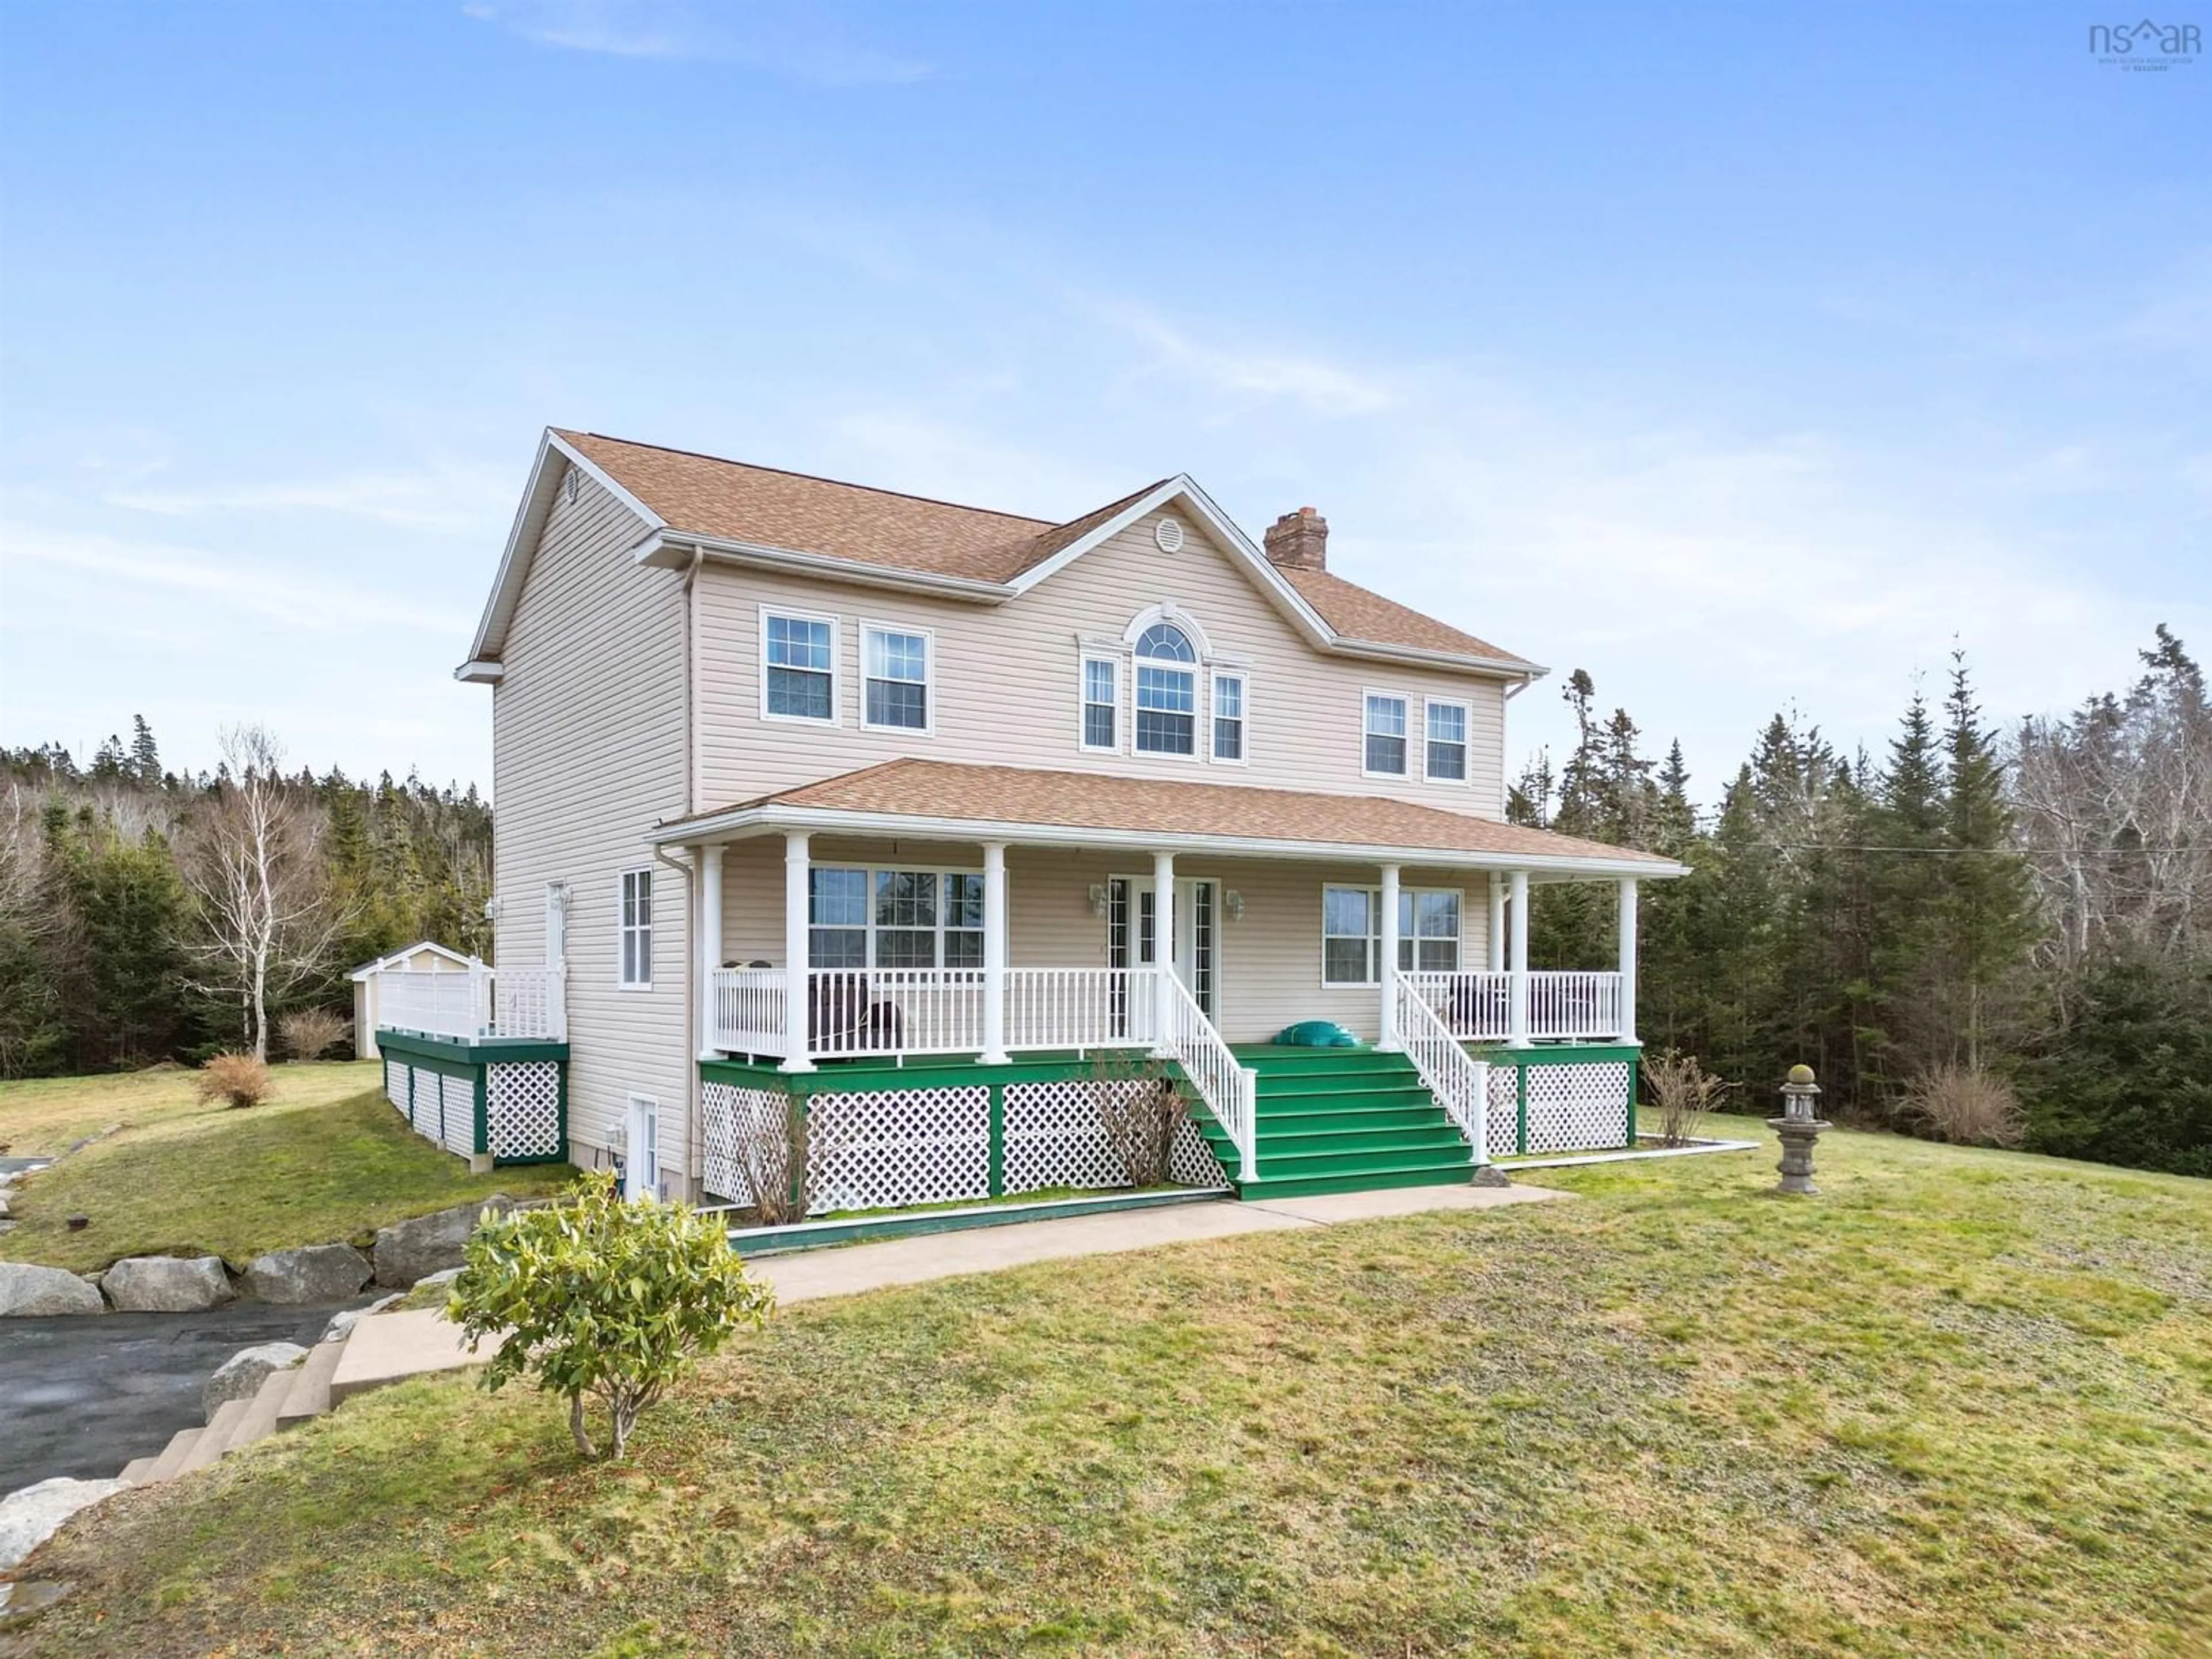 Home with unknown exterior material for 9085 Peggy's Cove Rd, Indian Harbour Nova Scotia B3Z 3N4